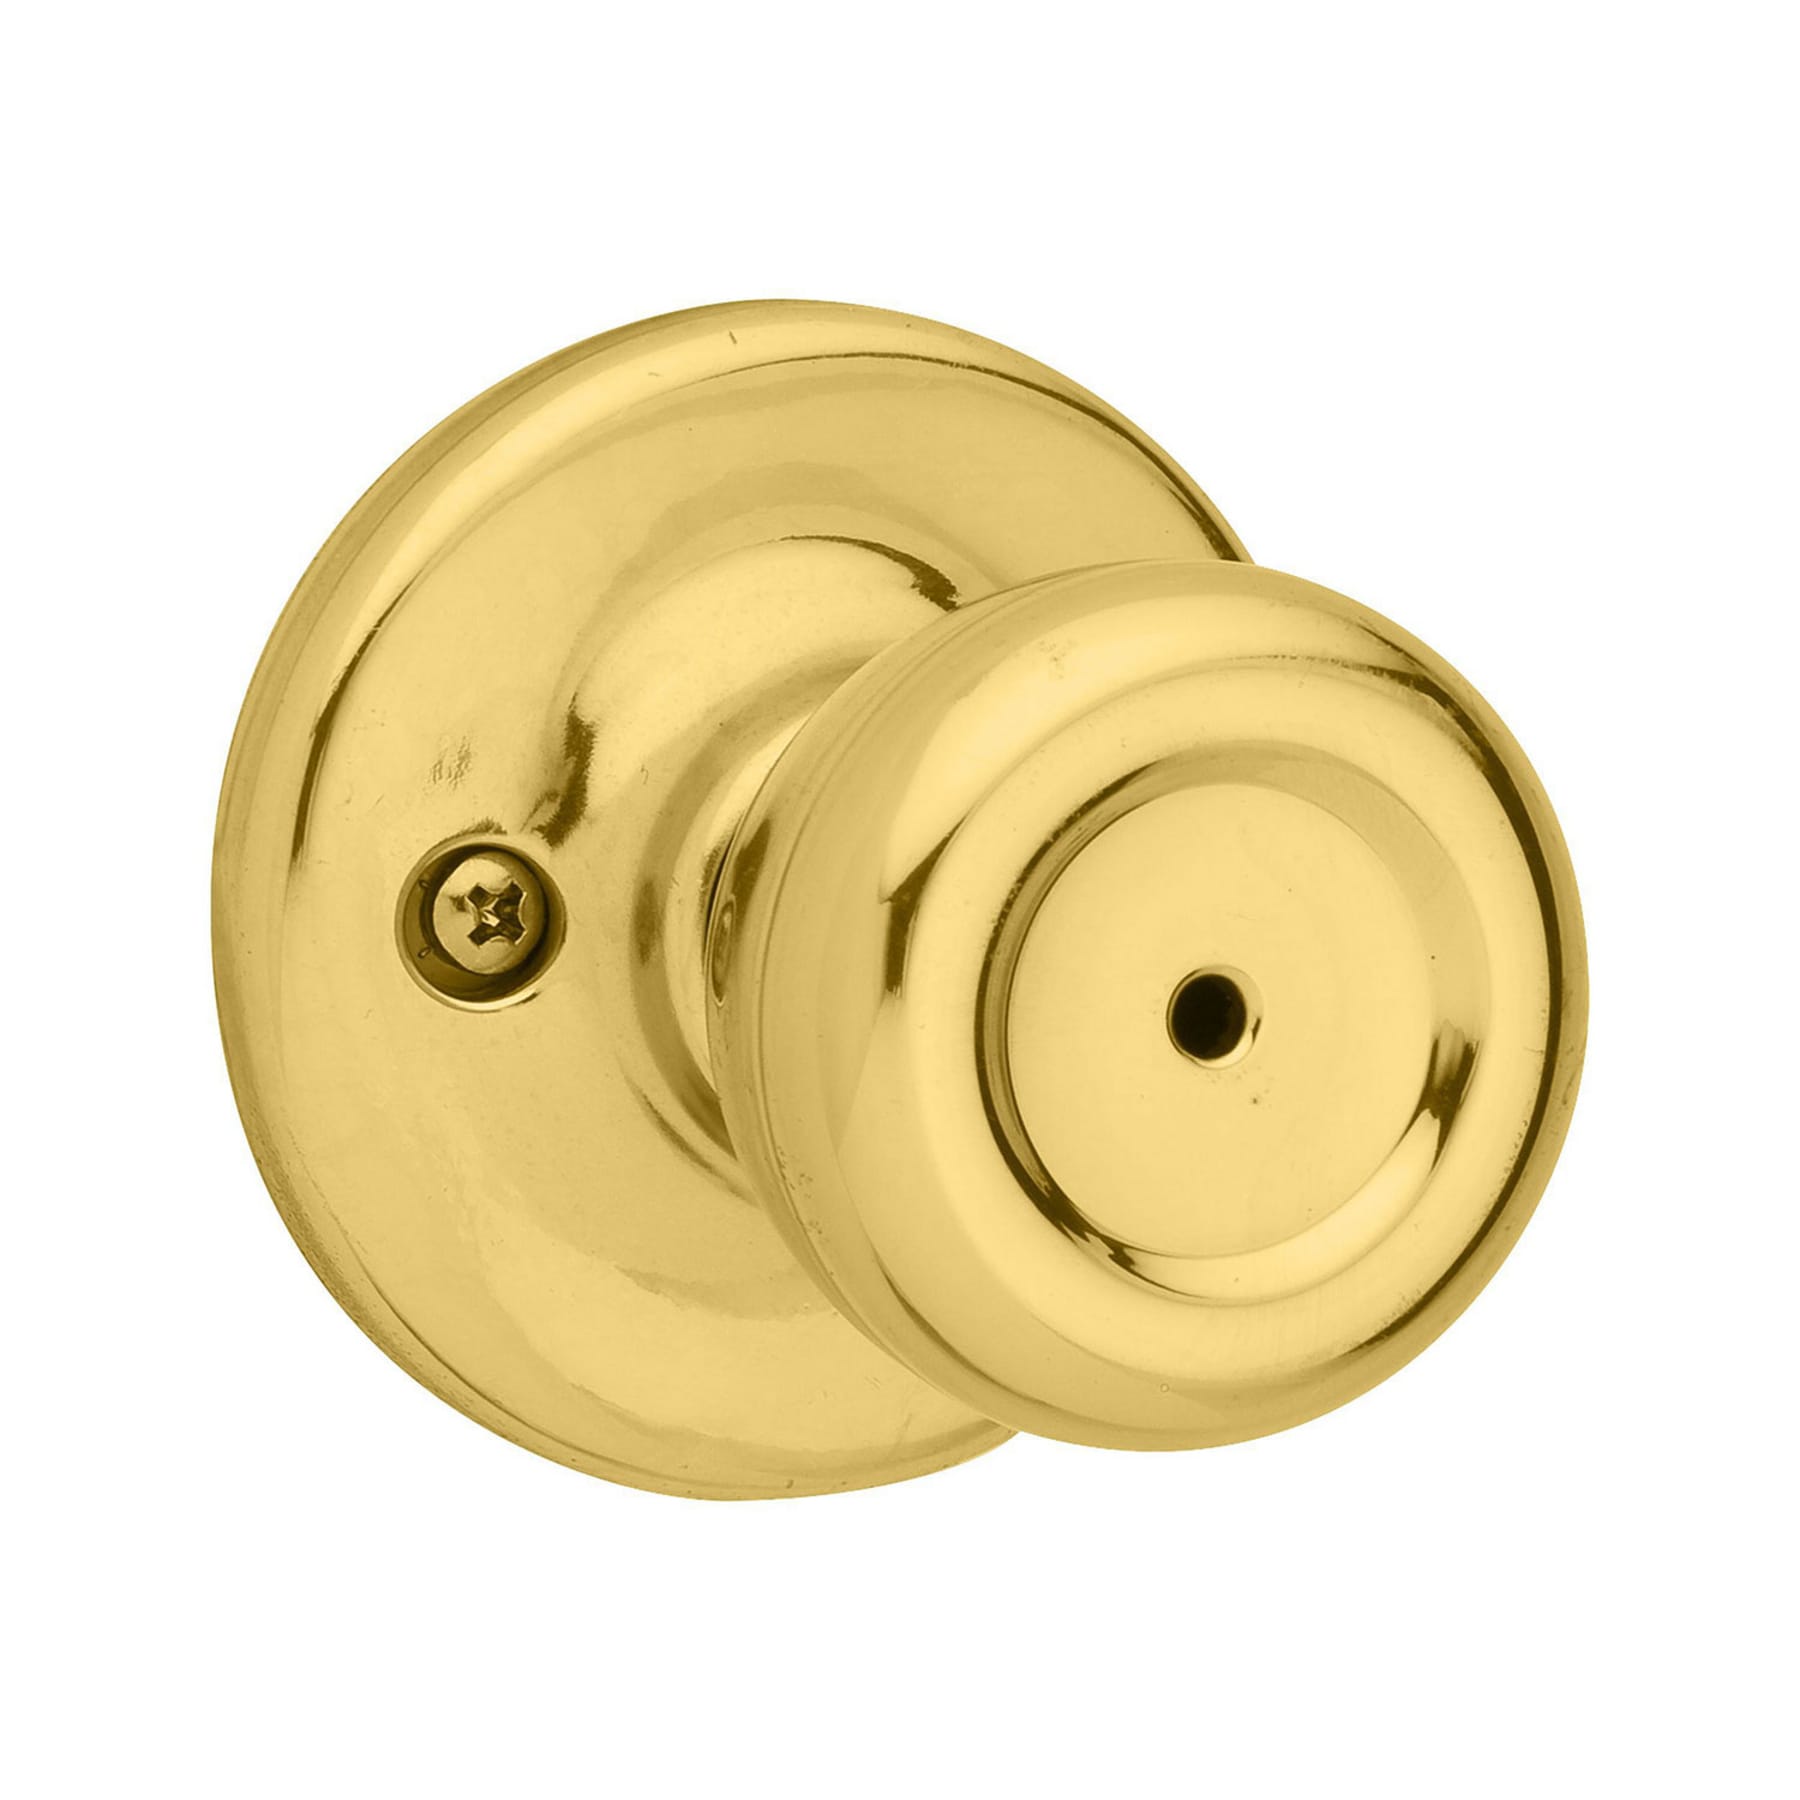 Details about   Mobile Home Interior Keyed Privacy Door Knob Handle Stainless Steel 2 Keys 